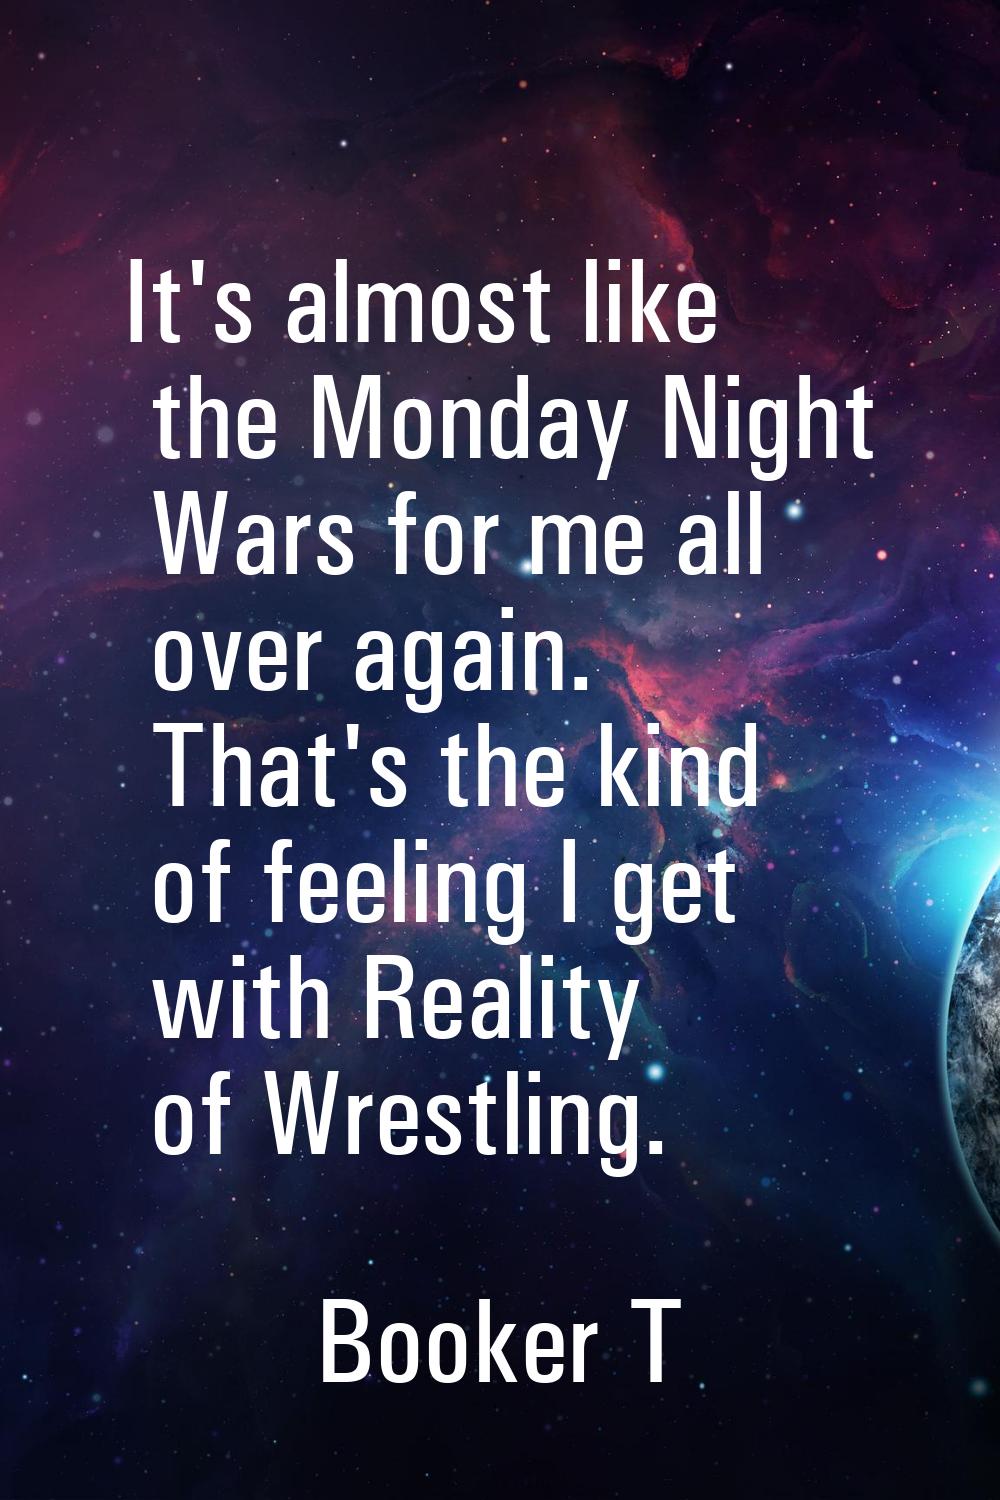 It's almost like the Monday Night Wars for me all over again. That's the kind of feeling I get with